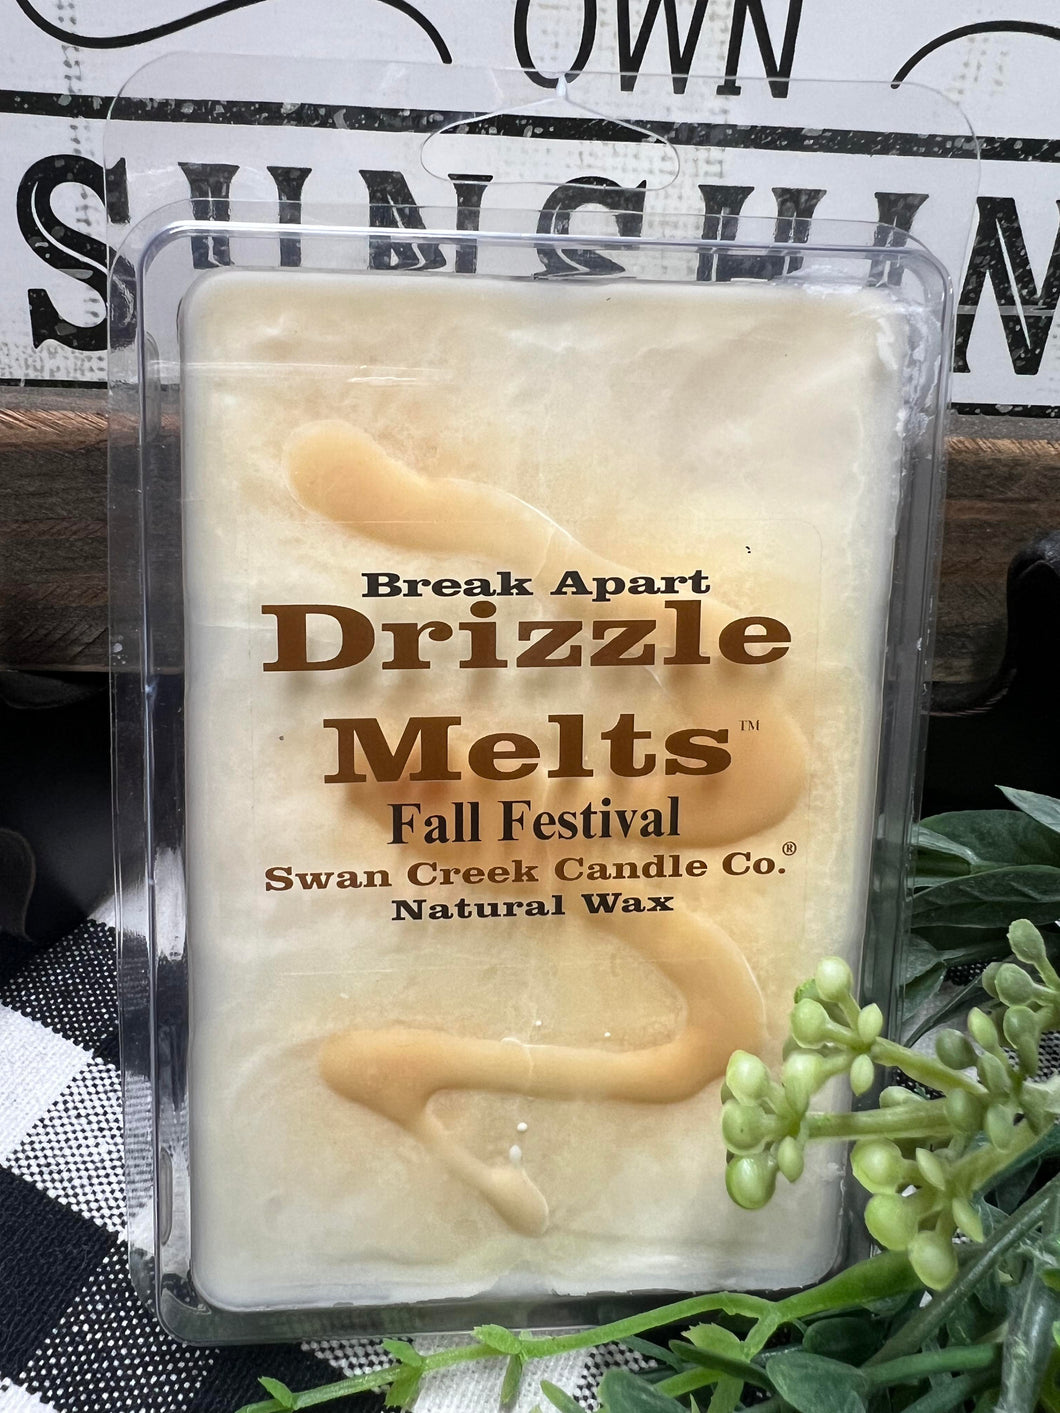 Swan Creek Candle Co. Fall Festival Drizzle Melts